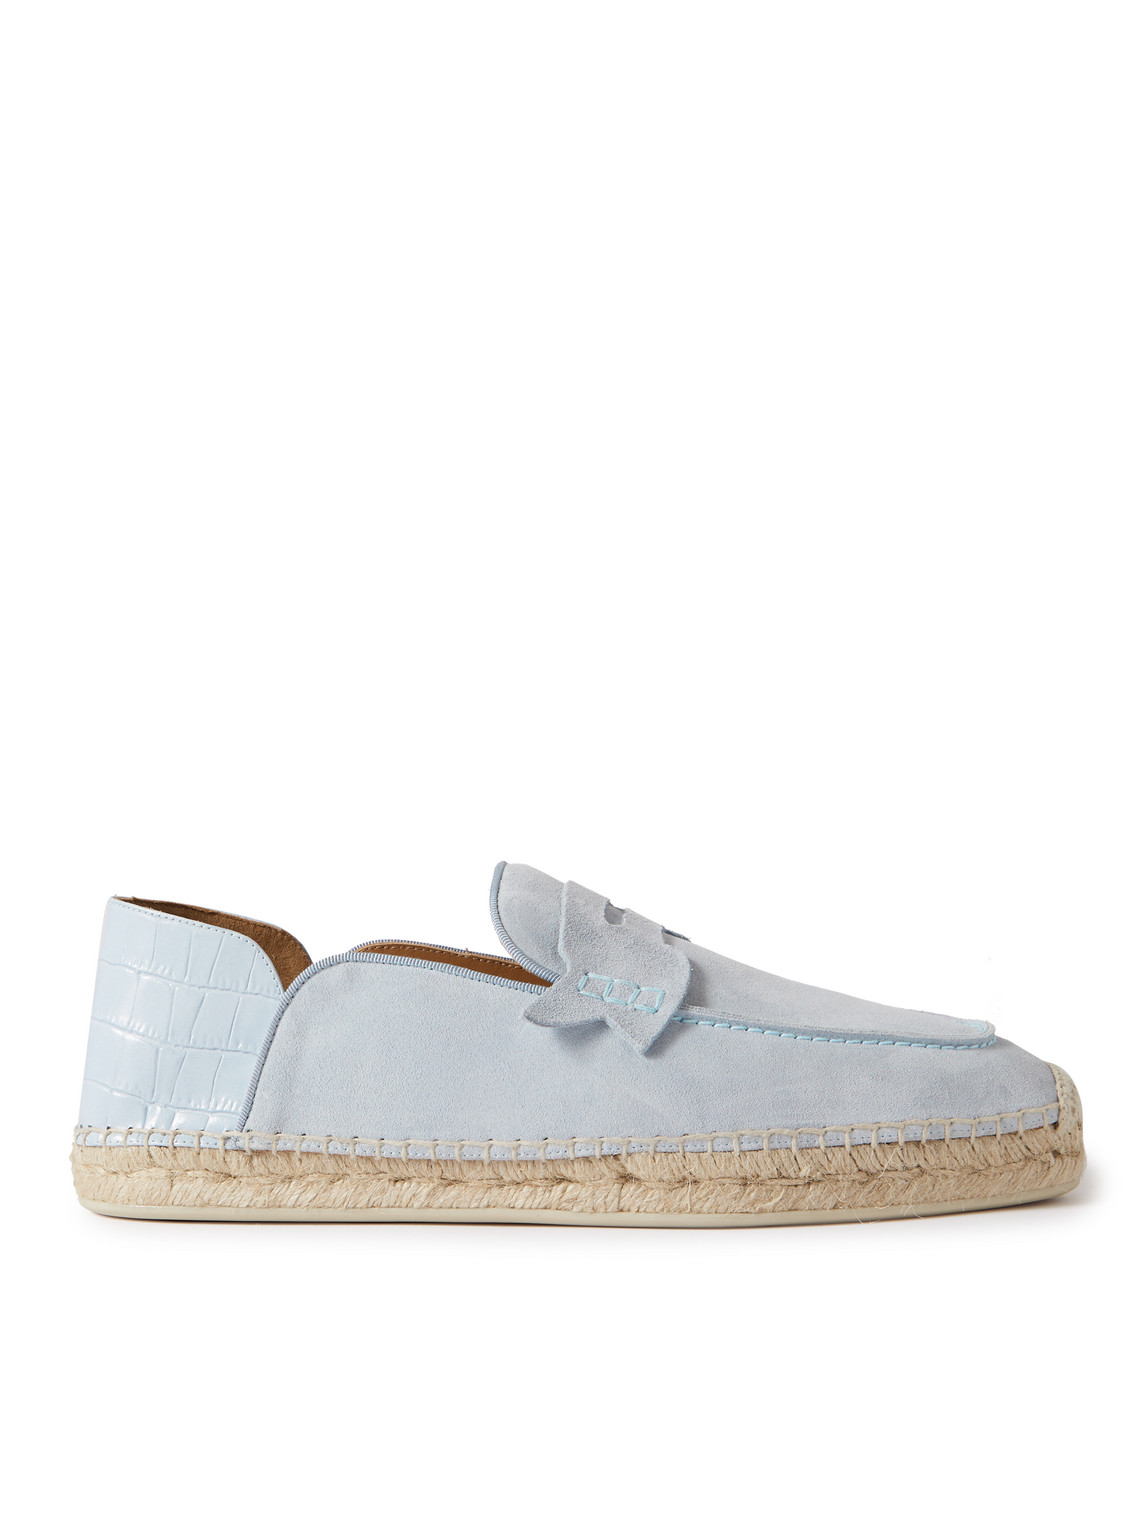 Christian Louboutin Mens Paseo Paquepapa Loafer-style Suede And Croc-embossed Leather Espadrilles In Blue